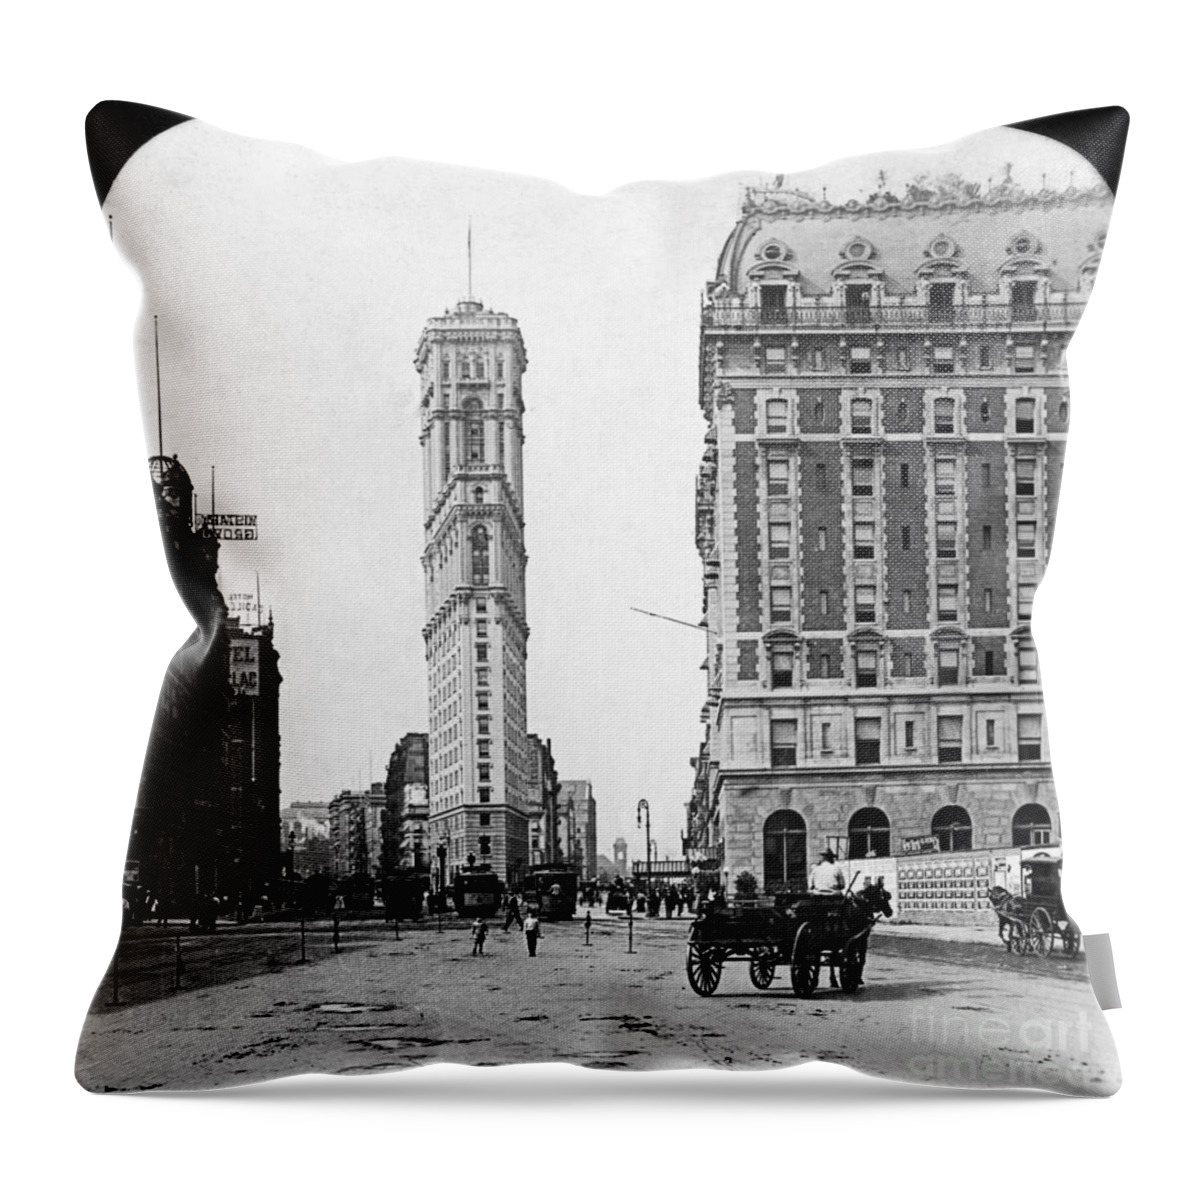 1908 Throw Pillow featuring the photograph Times Square, 1908 by Granger